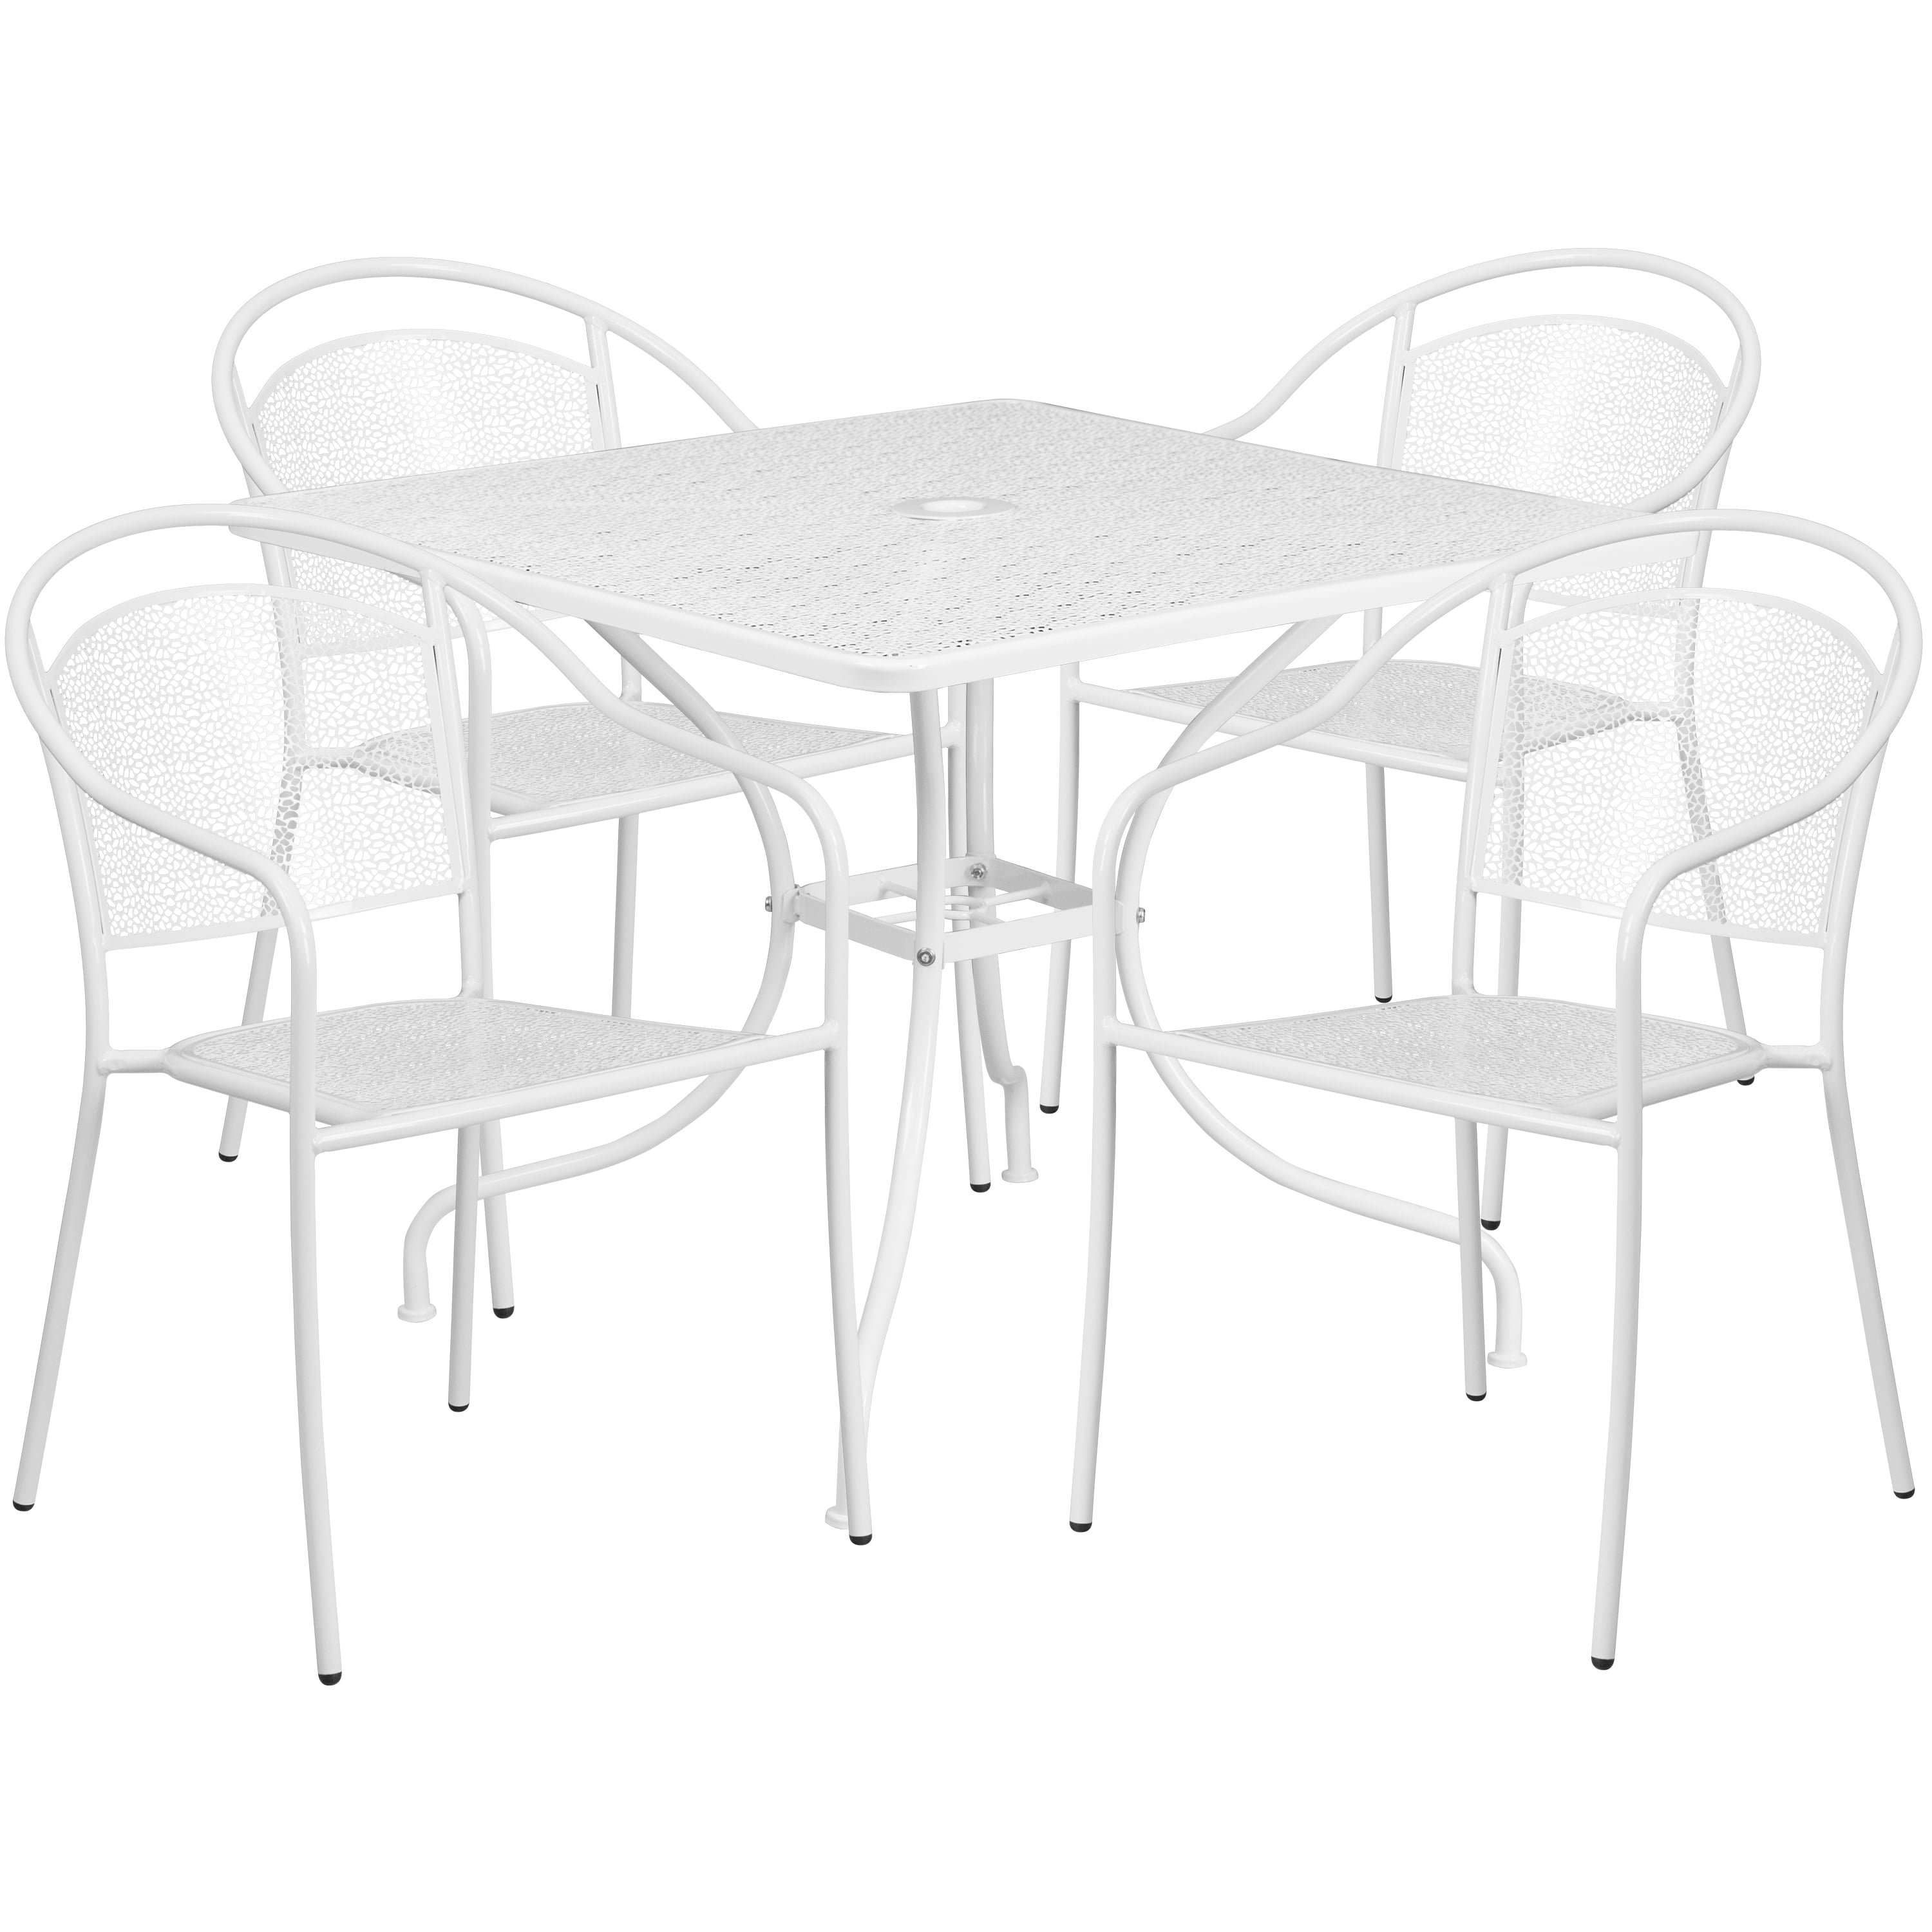 Flash Furniture Commercial Grade 35.5" Square White Indoor-Outdoor Steel Patio Table Set with 4 Round Back Chairs - image 2 of 5